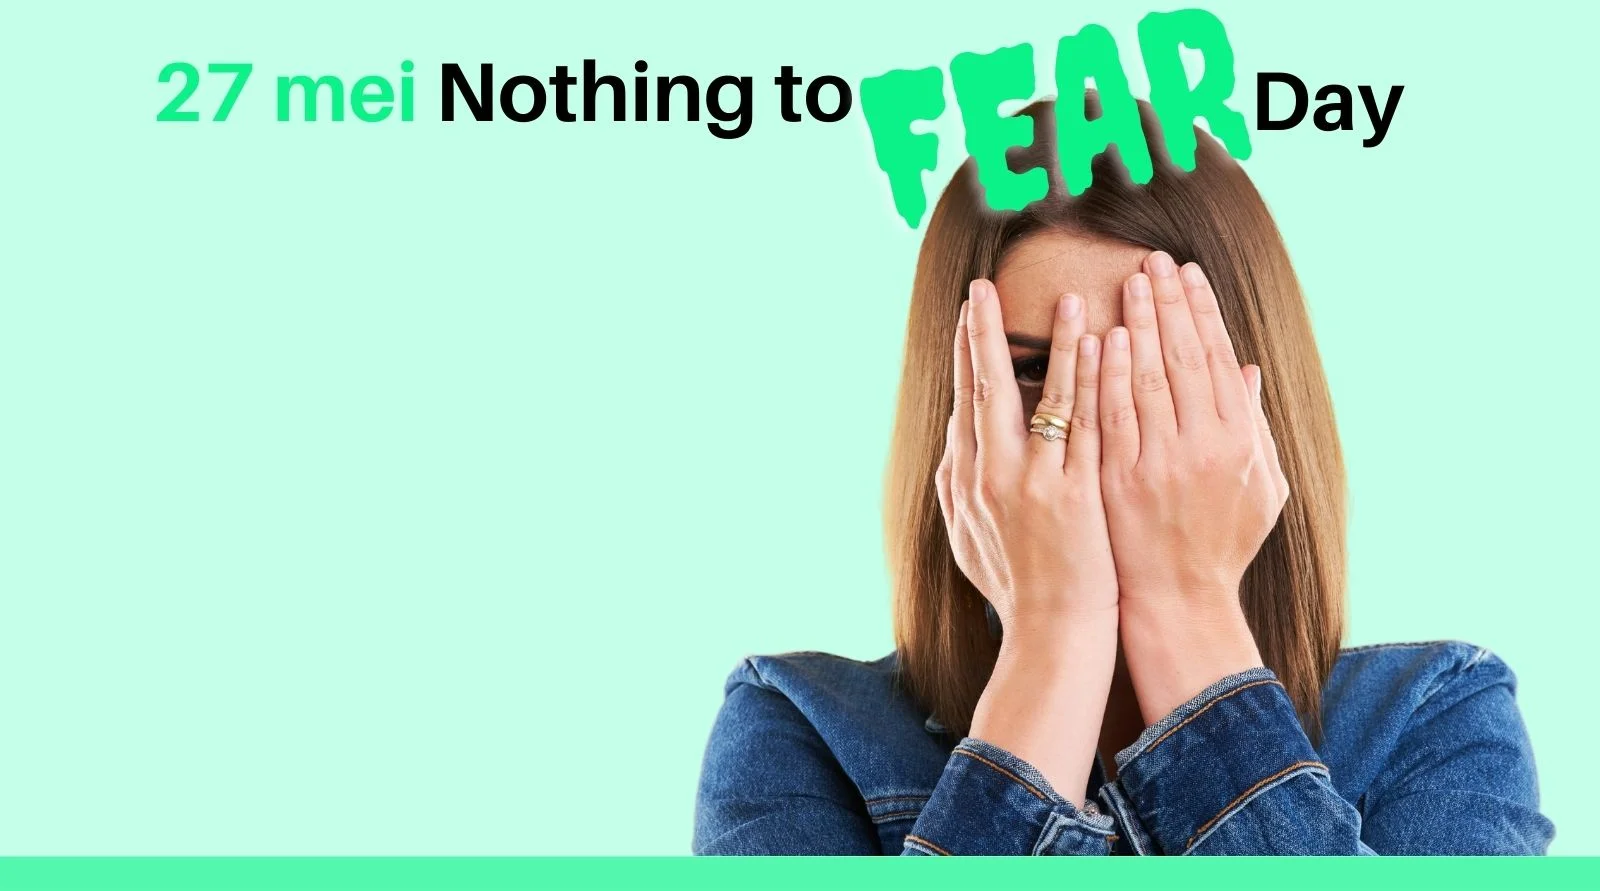 Nothing to fear day